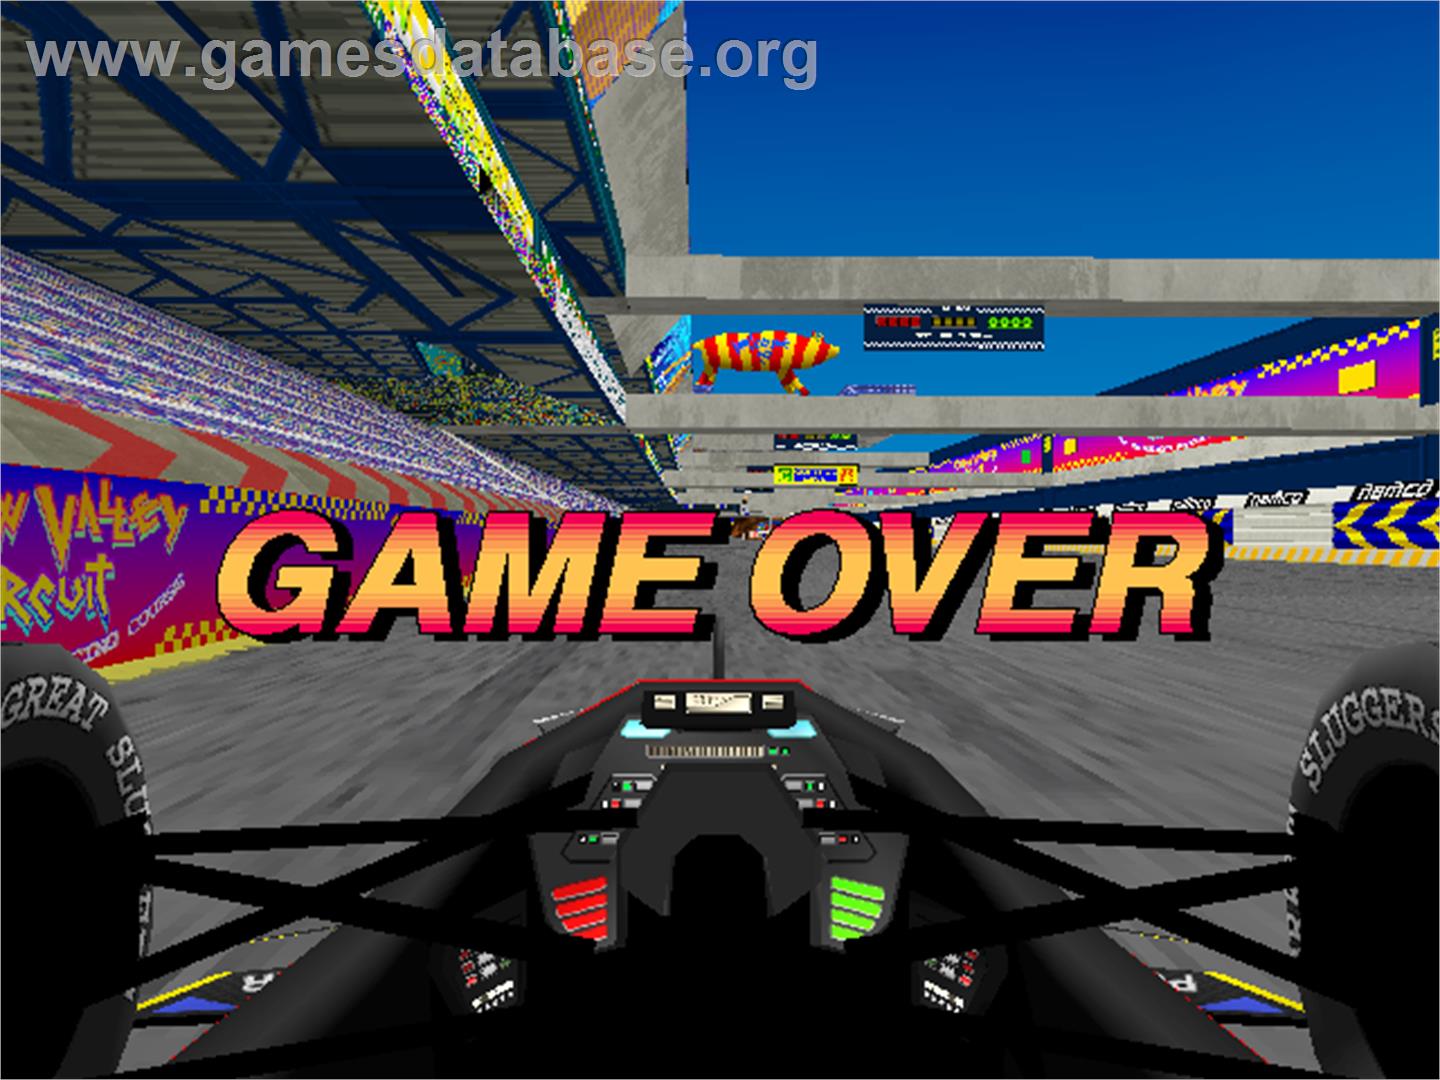 Ace Driver: Victory Lap - Arcade - Artwork - Game Over Screen